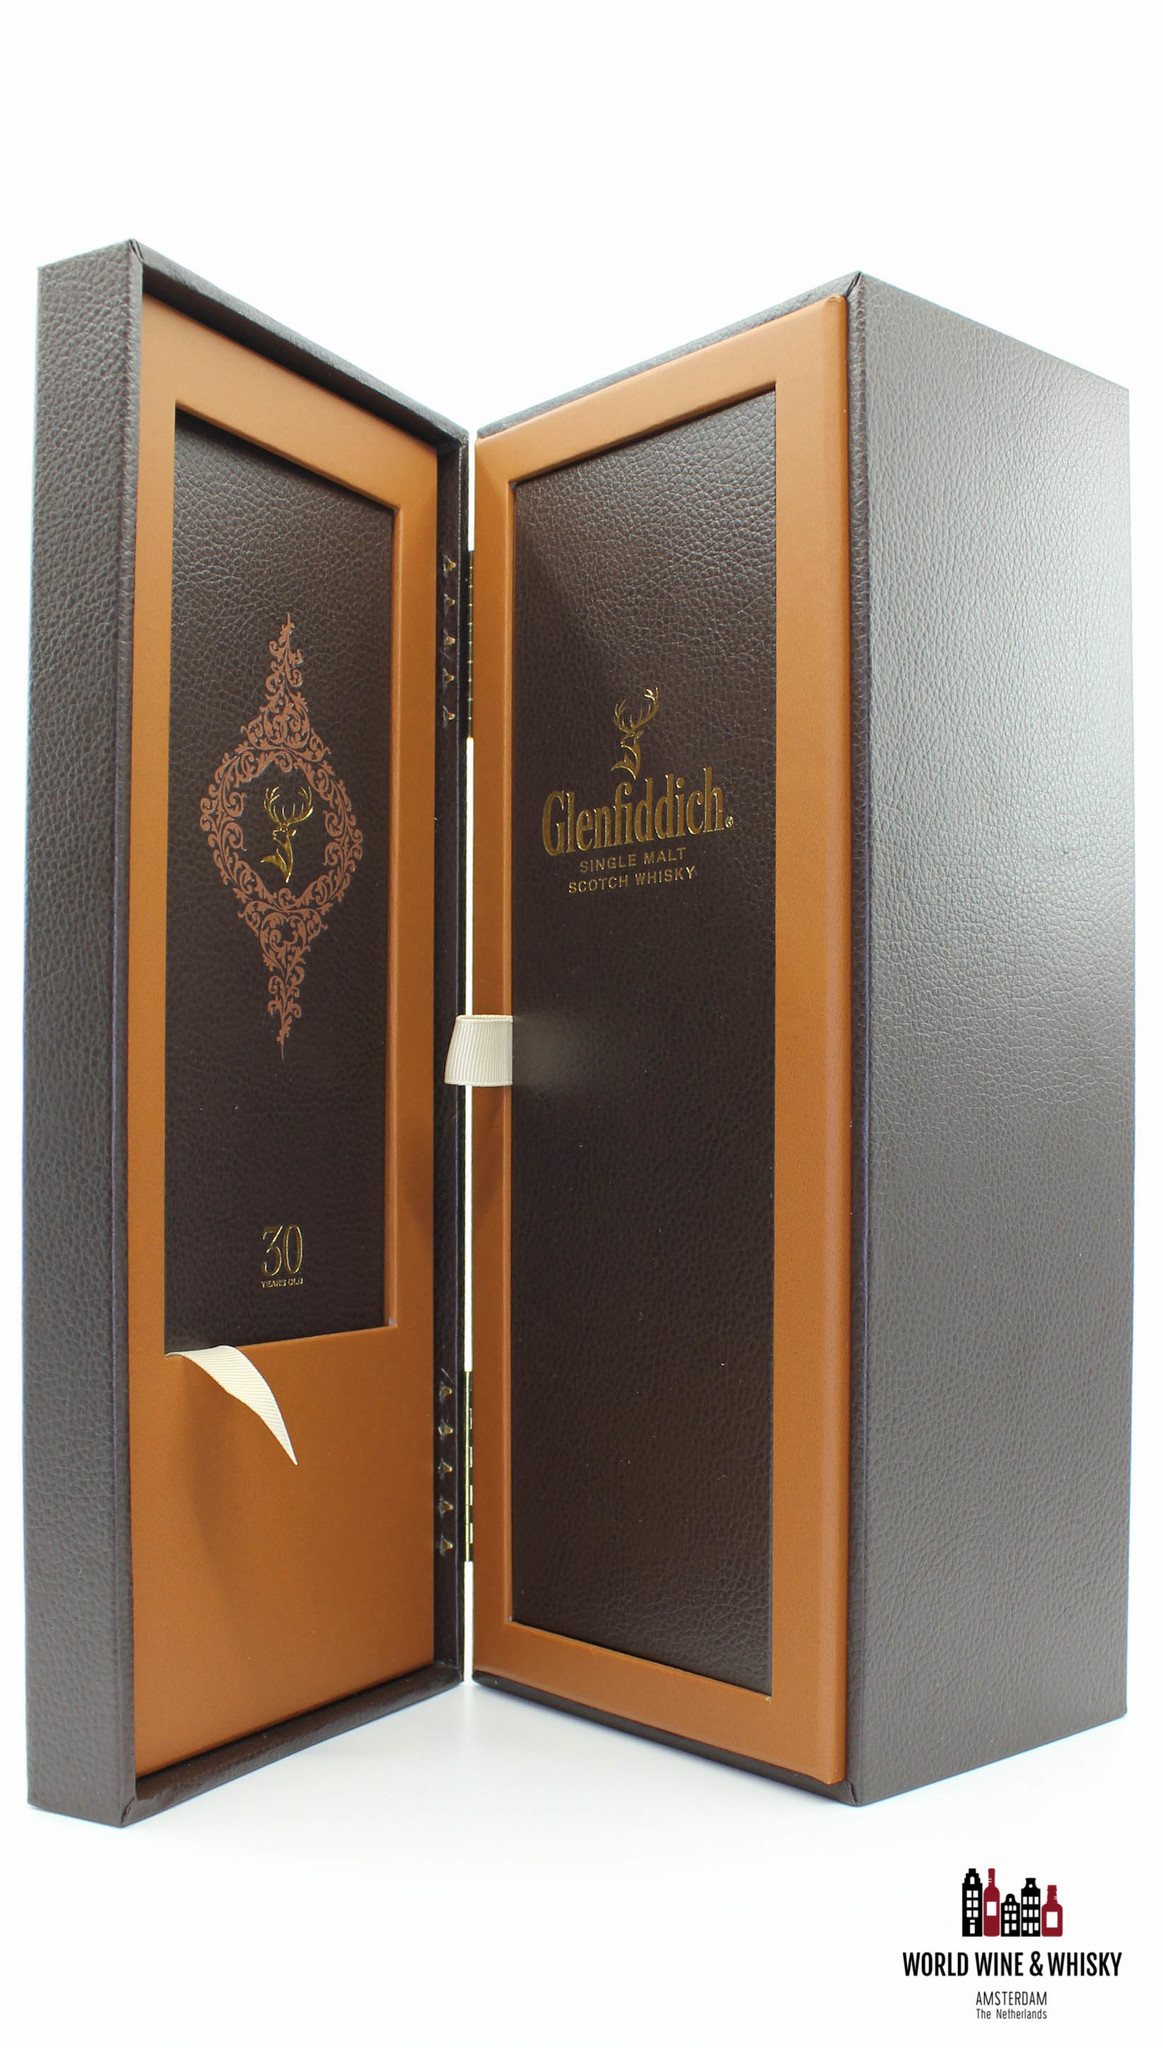 Glenfiddich Glenfiddich 30 Years Old - Cask Selection 00045 43% (in luxury case)